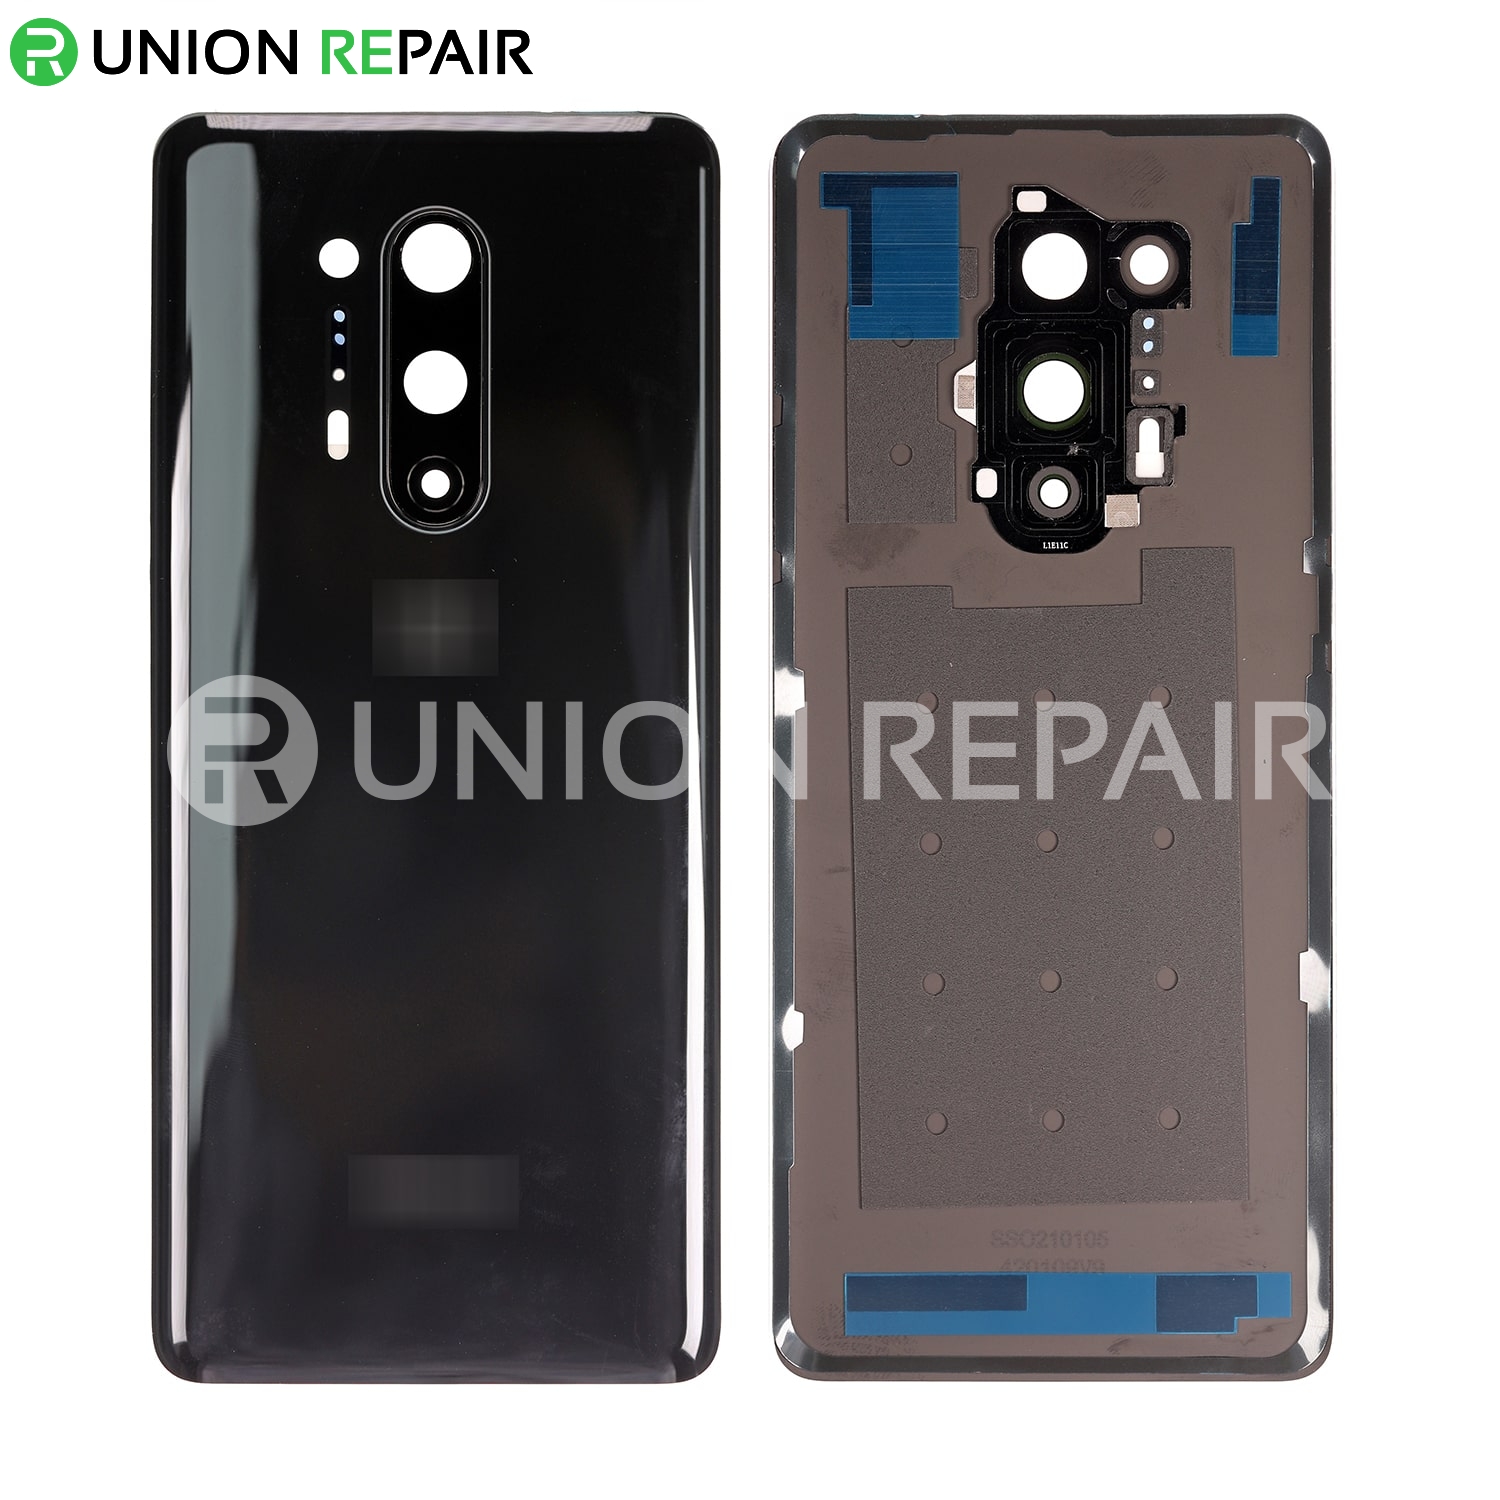 Replacement for OnePlus 8 Pro Battery Door - Onyx Black